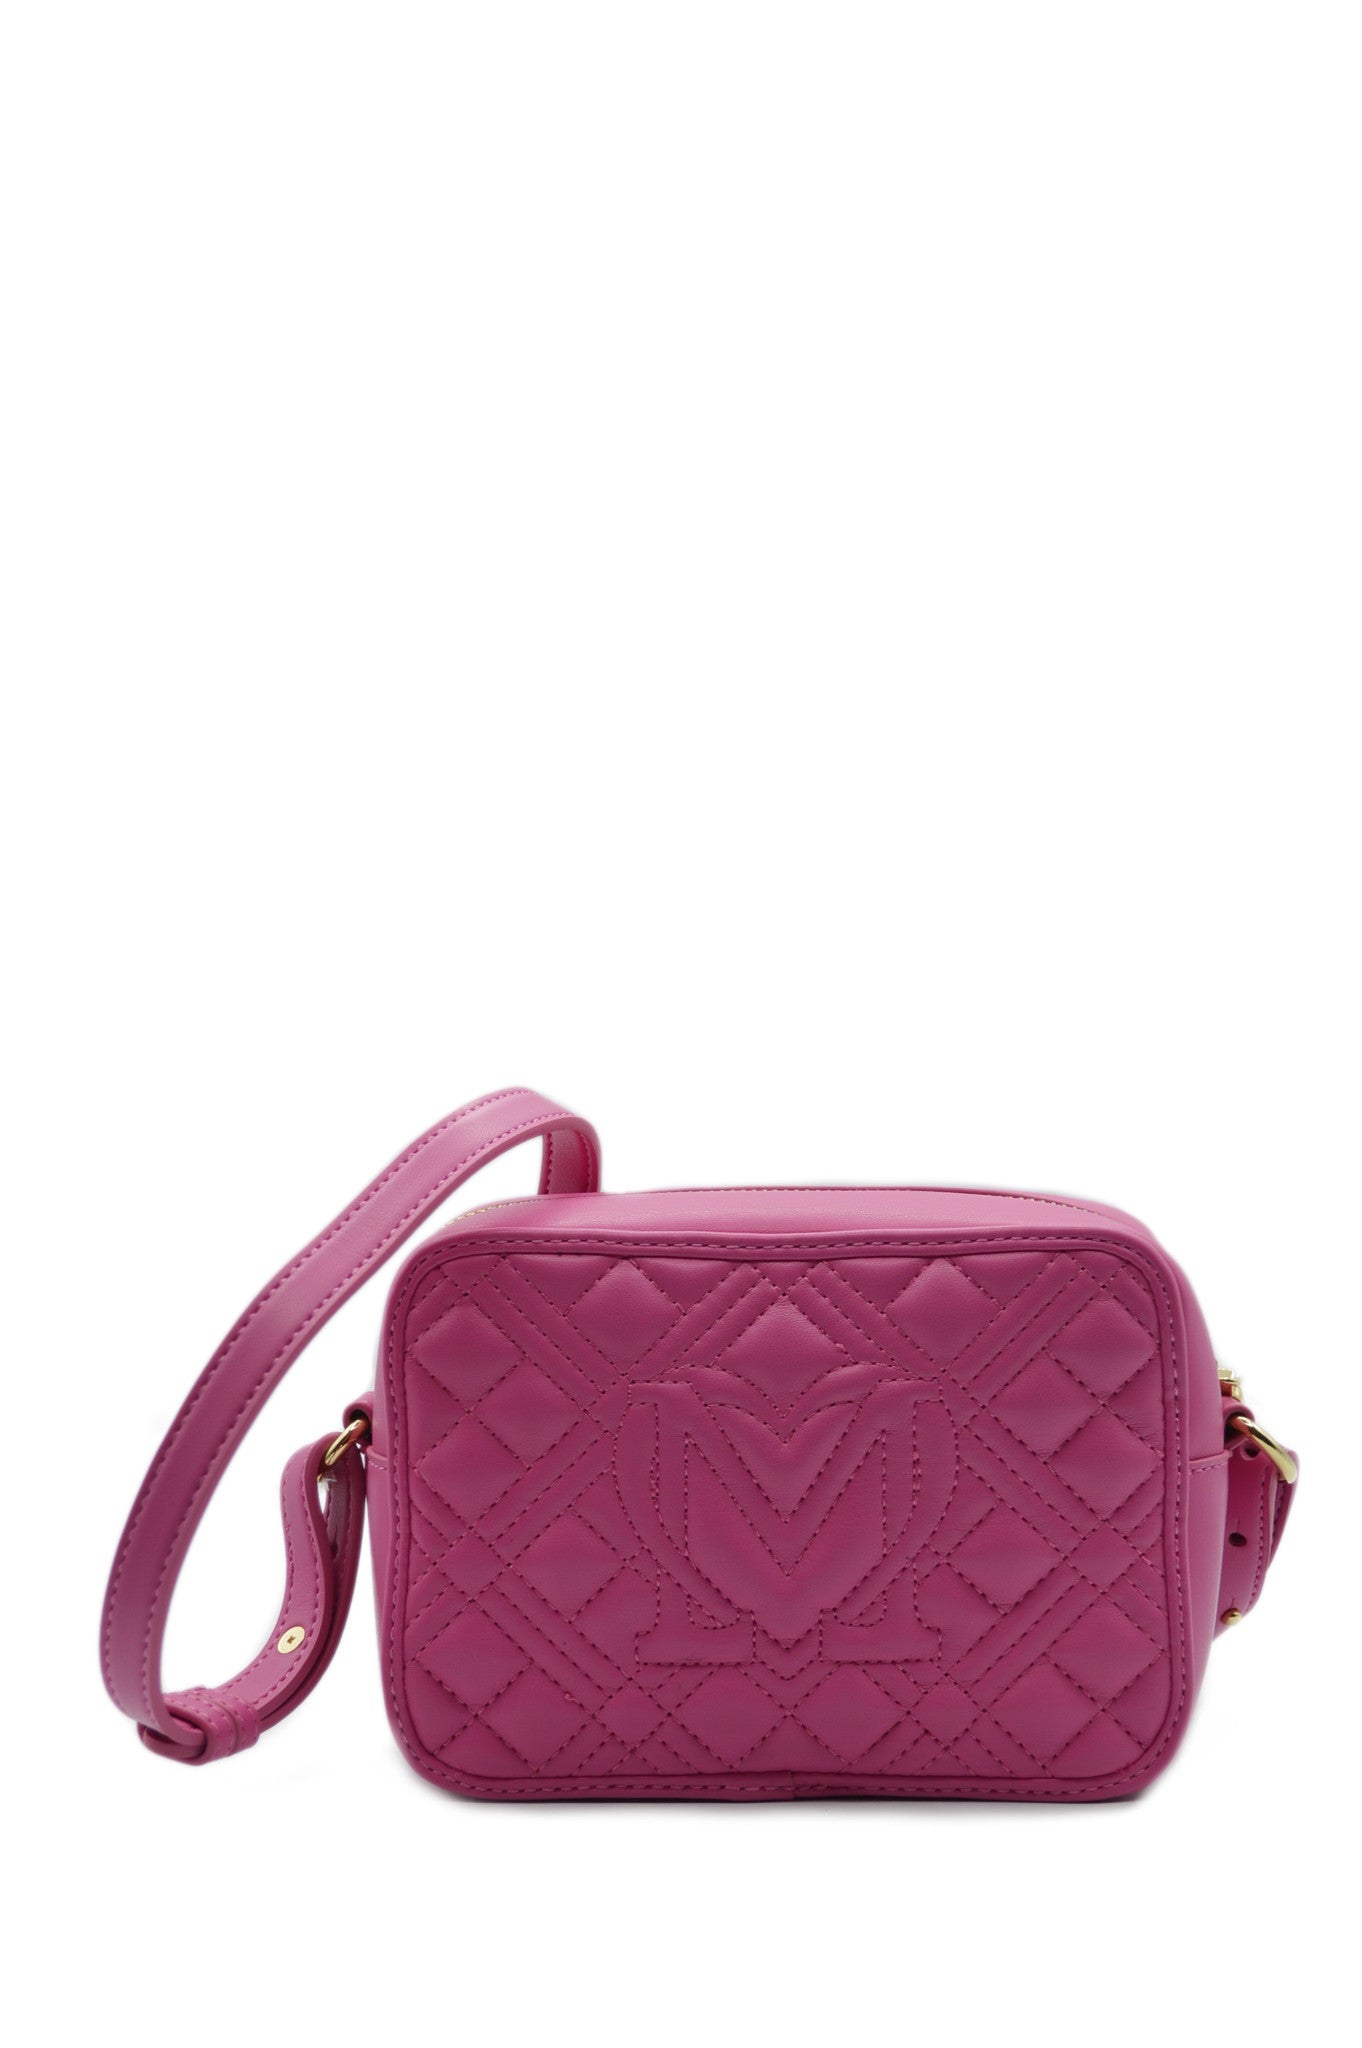 BORSA QUILTED PU FUXIA